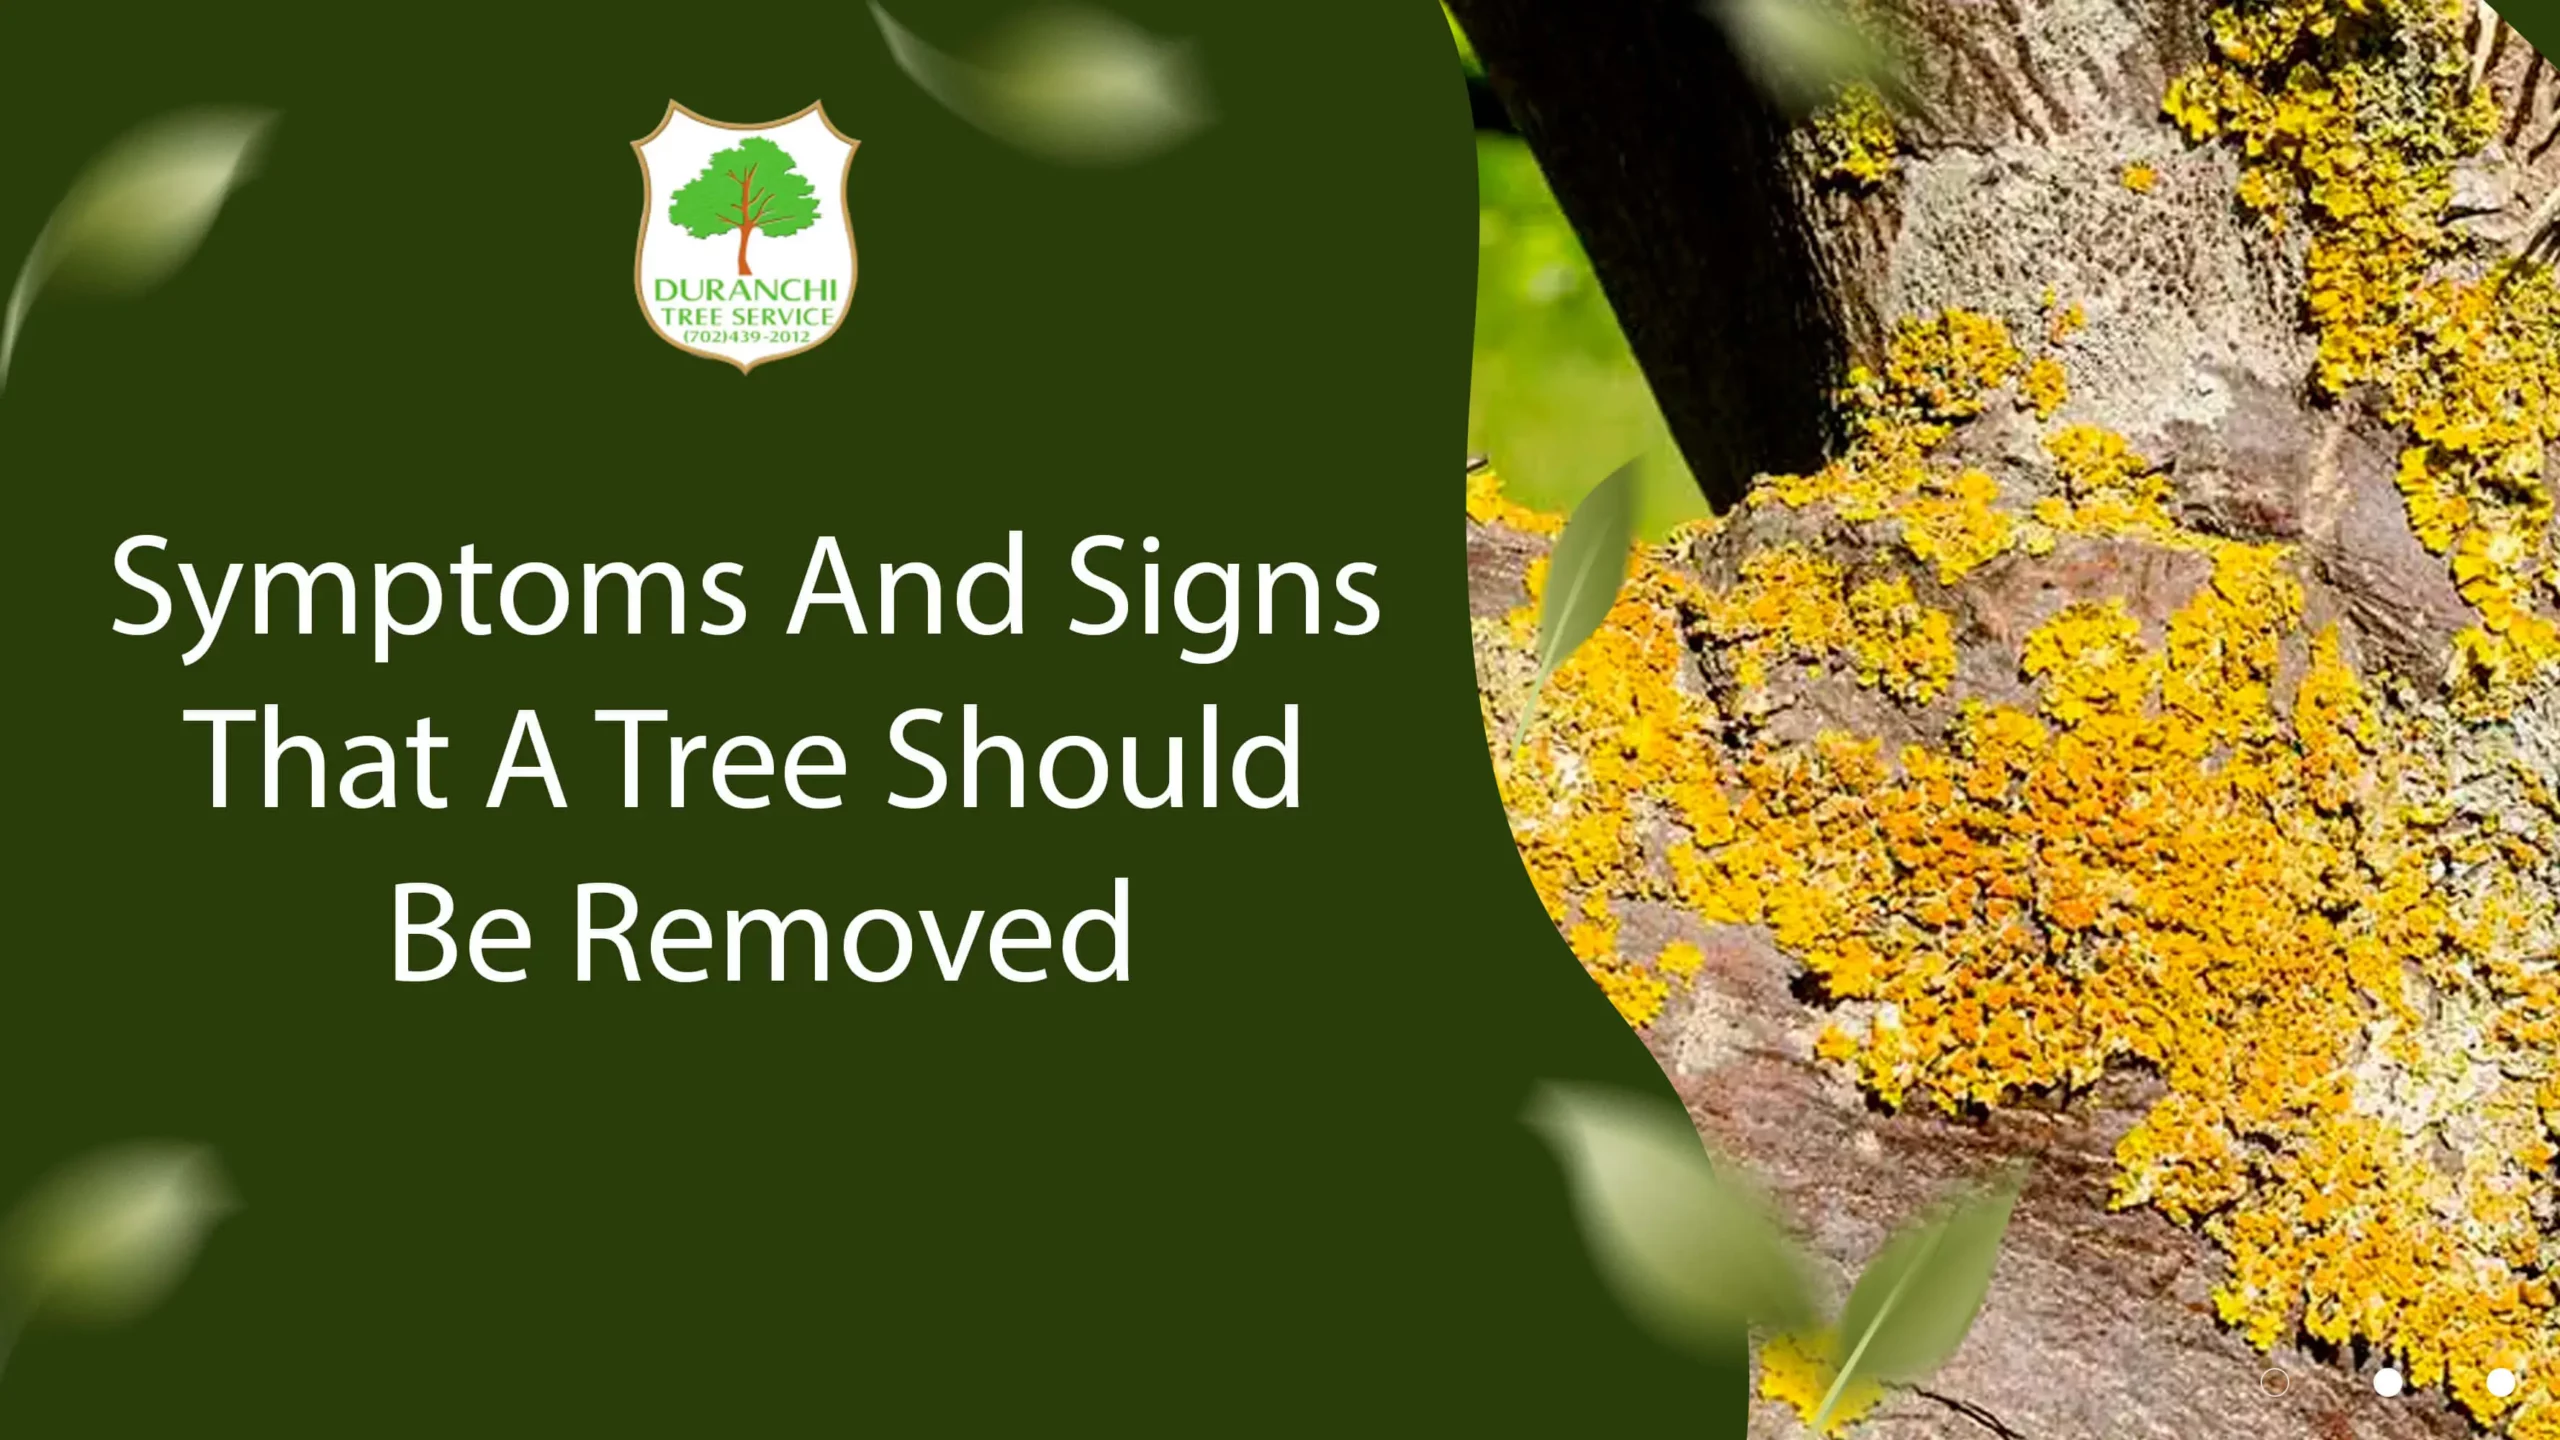 Symptoms And Signs That A Tree Should Be Removed